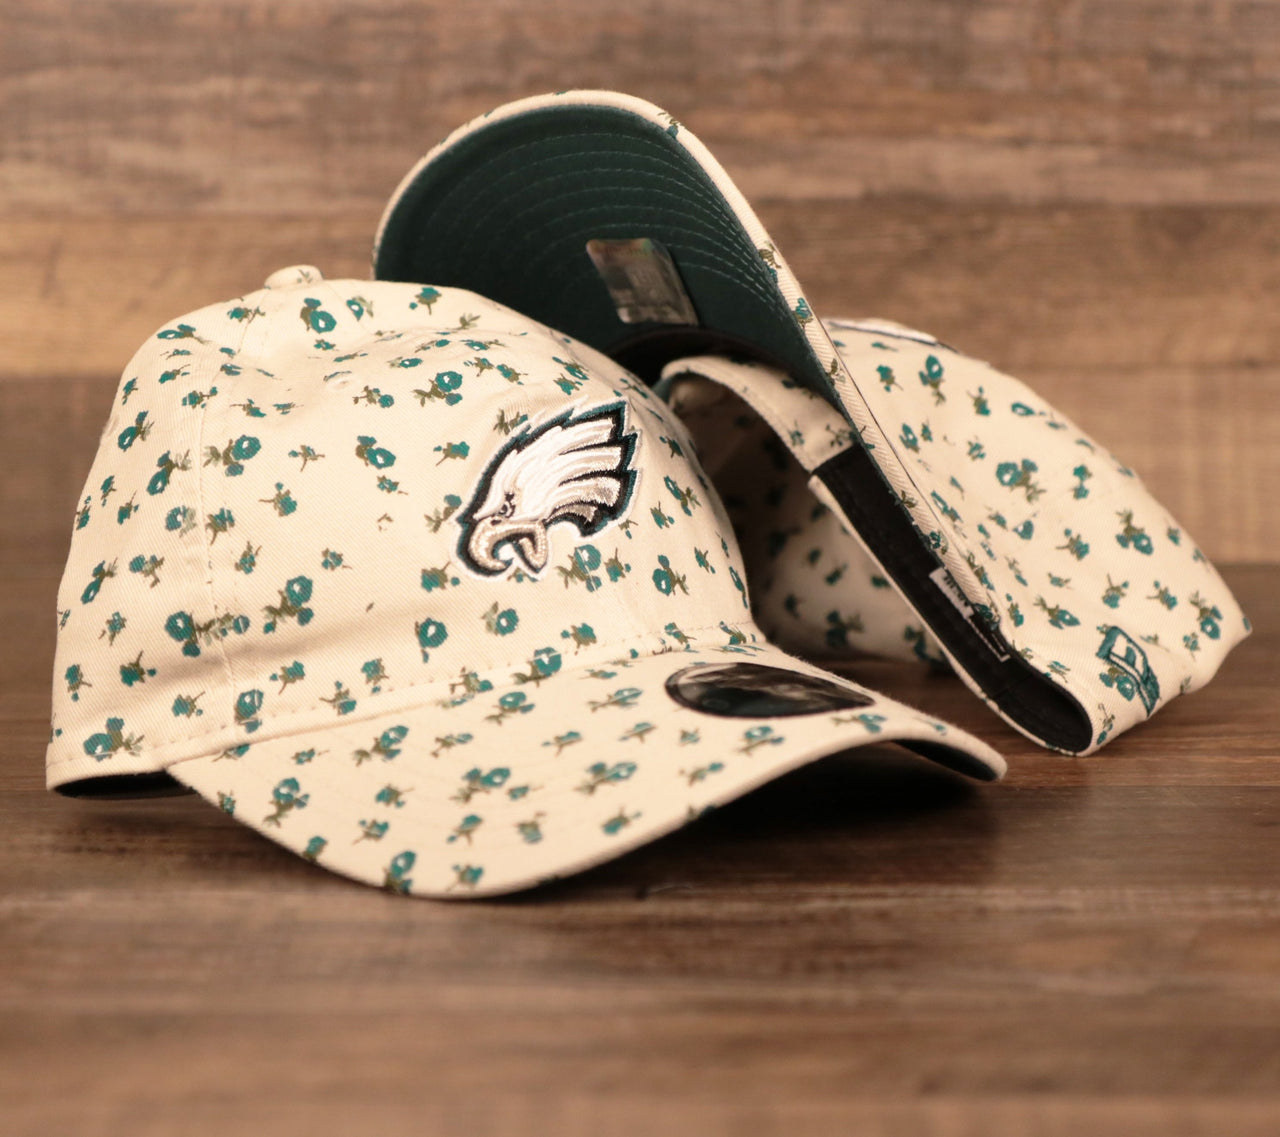 The Philadelphia Eagles cream youth micro floral baseball hat by New Era.